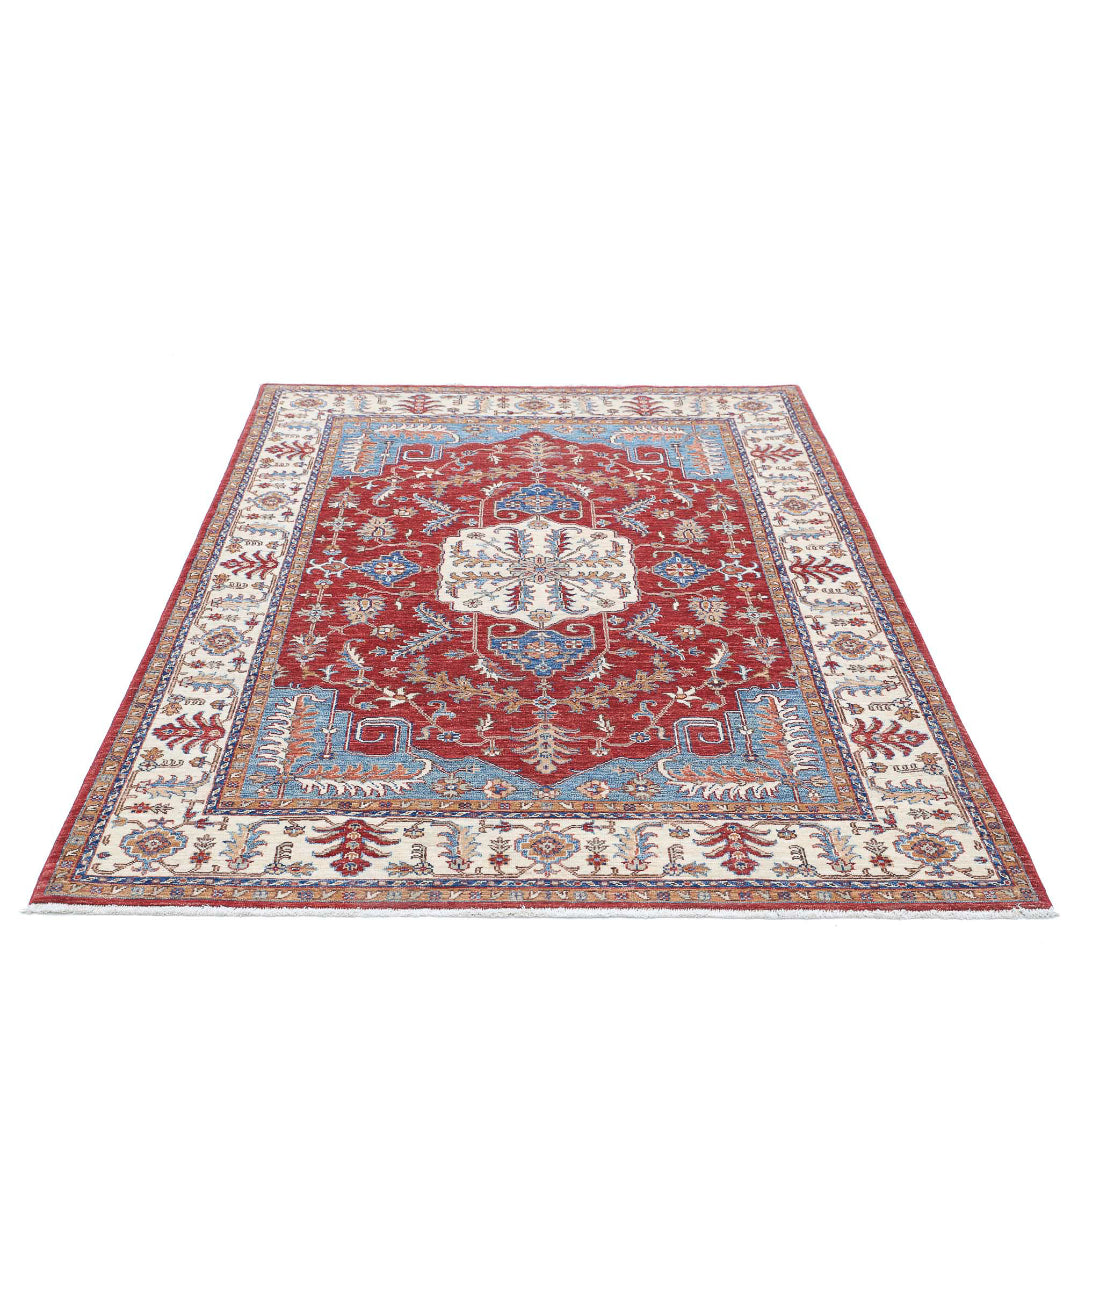 Hand Knotted Heriz Wool Rug - 4'9'' x 6'5'' 4'9'' x 6'5'' (143 X 193) / Red / Ivory